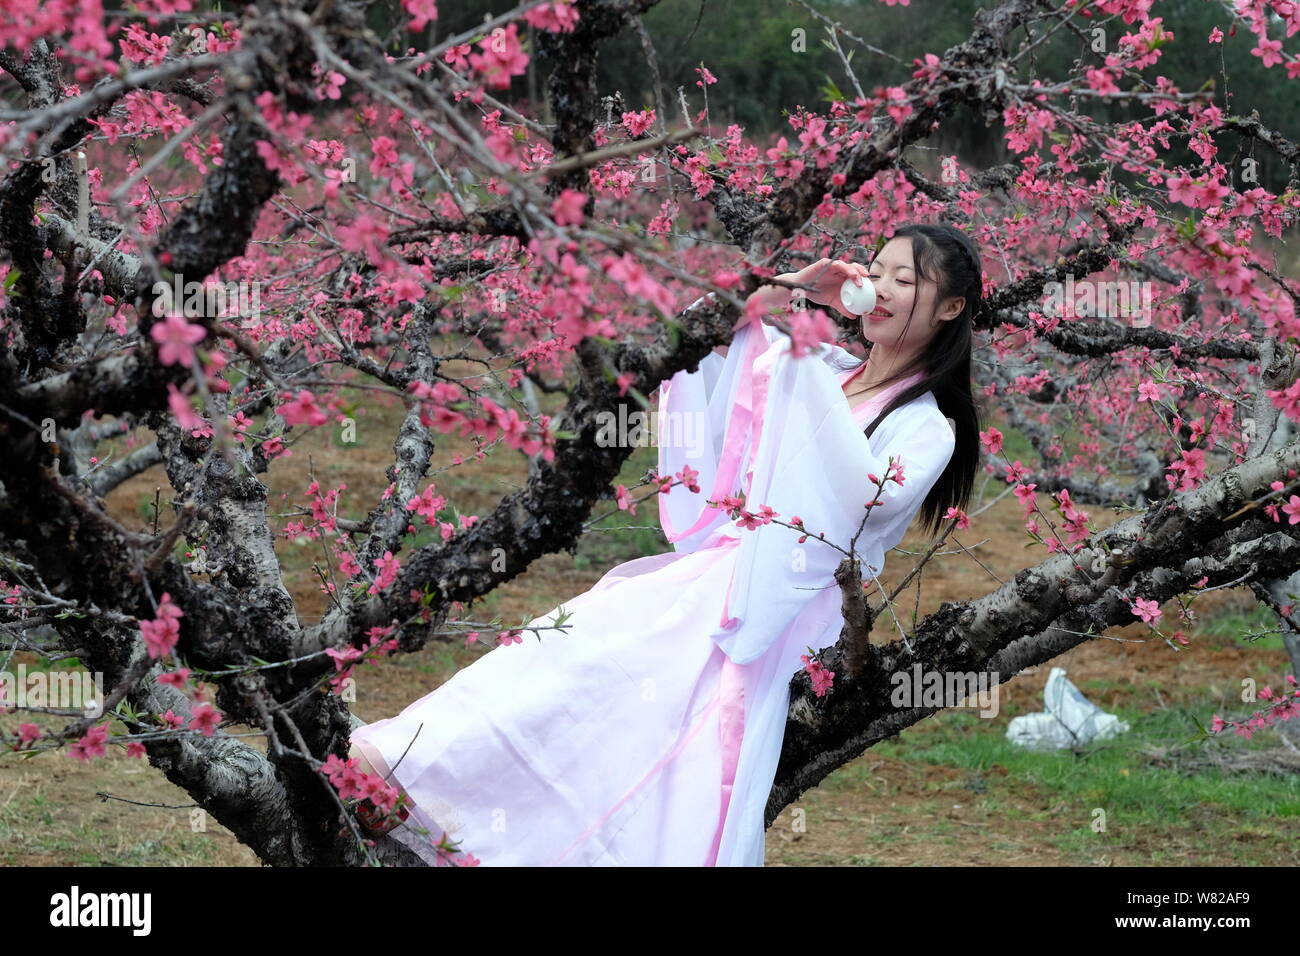 https://c8.alamy.com/comp/W82AF9/students-dressed-in-chinese-han-costumes-poses-on-a-peach-tree-at-an-event-to-mark-the-peach-blossom-festival-in-lianzhou-city-south-chinas-guangdon-W82AF9.jpg